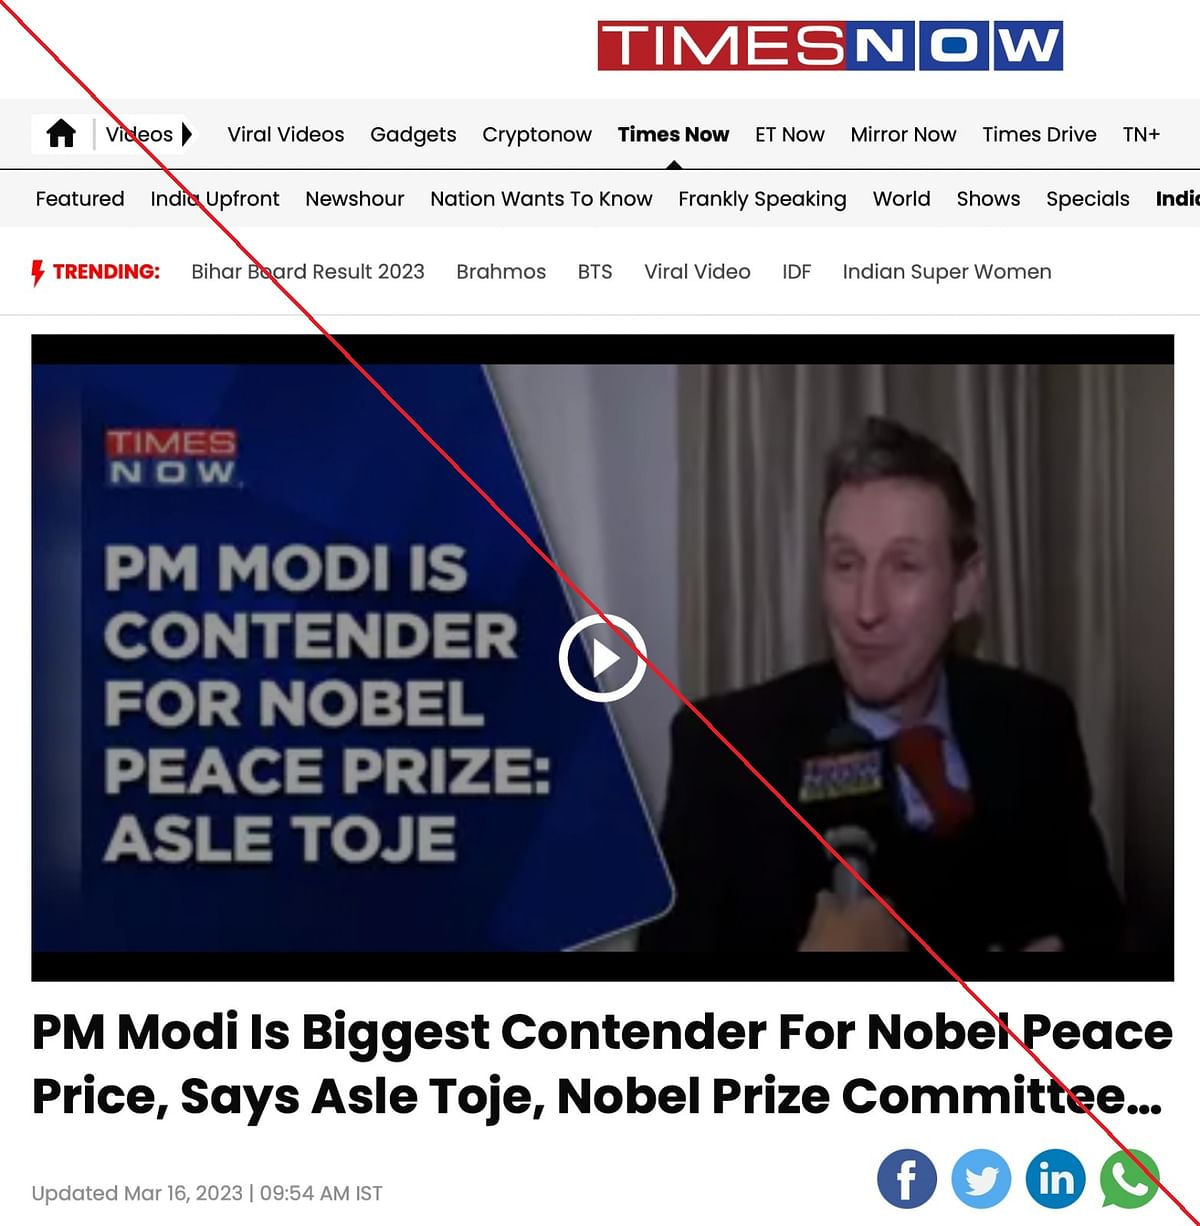 <div class="paragraphs"><p>An archive of the article can be seen <a href="https://web.archive.org/web/20230316045659/https://www.timesnownews.com/videos/times-now/india/pm-modi-is-biggest-contender-for-nobel-peace-price-says-asle-toje-nobel-prize-committee-member-video-98682893" rel="nofollow">here</a>.</p></div>